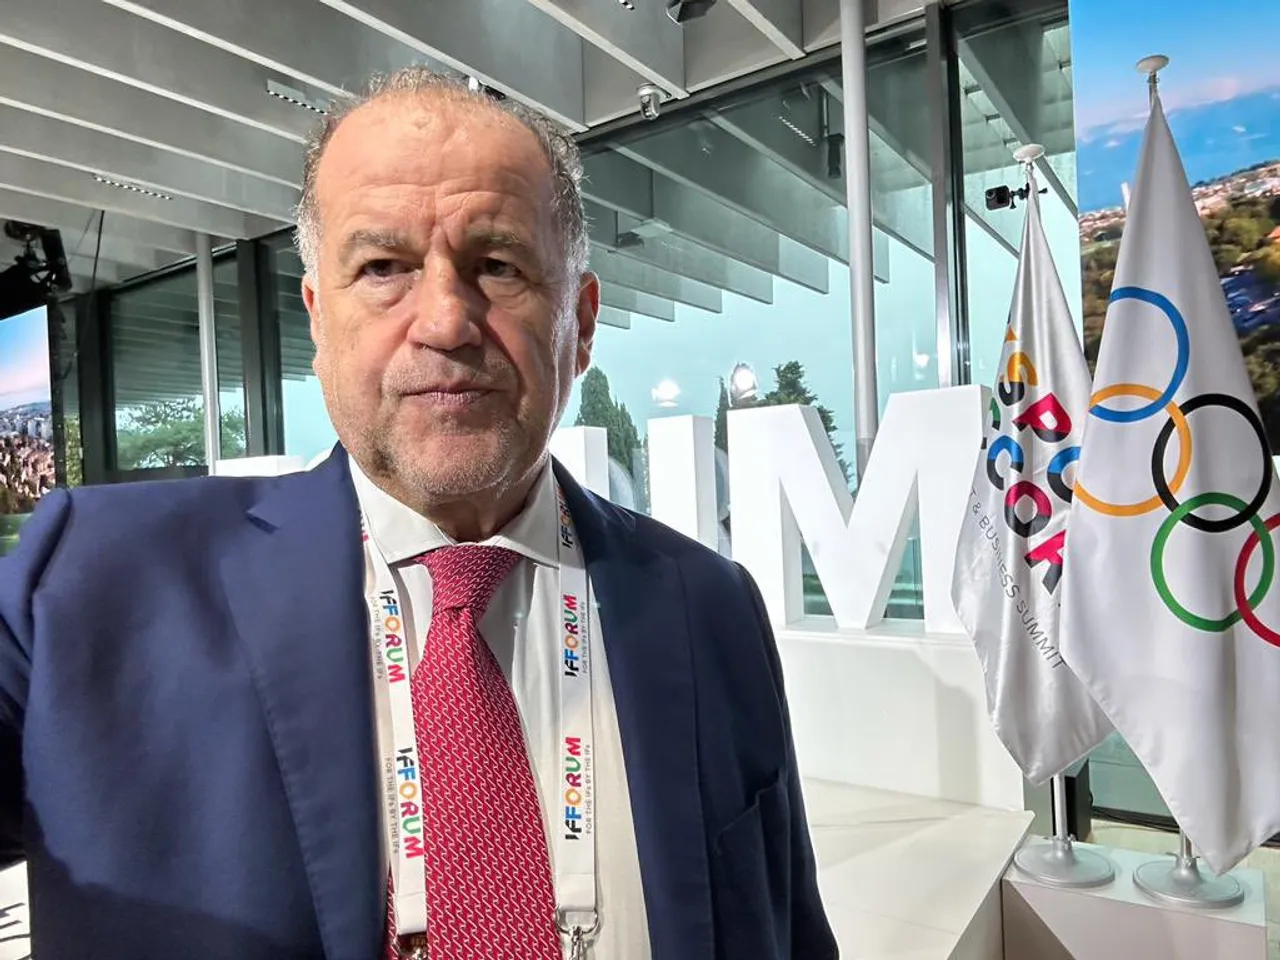 ISSF President meets Rossi IOC President ahead of SportAccord IF Forum in Lausanne